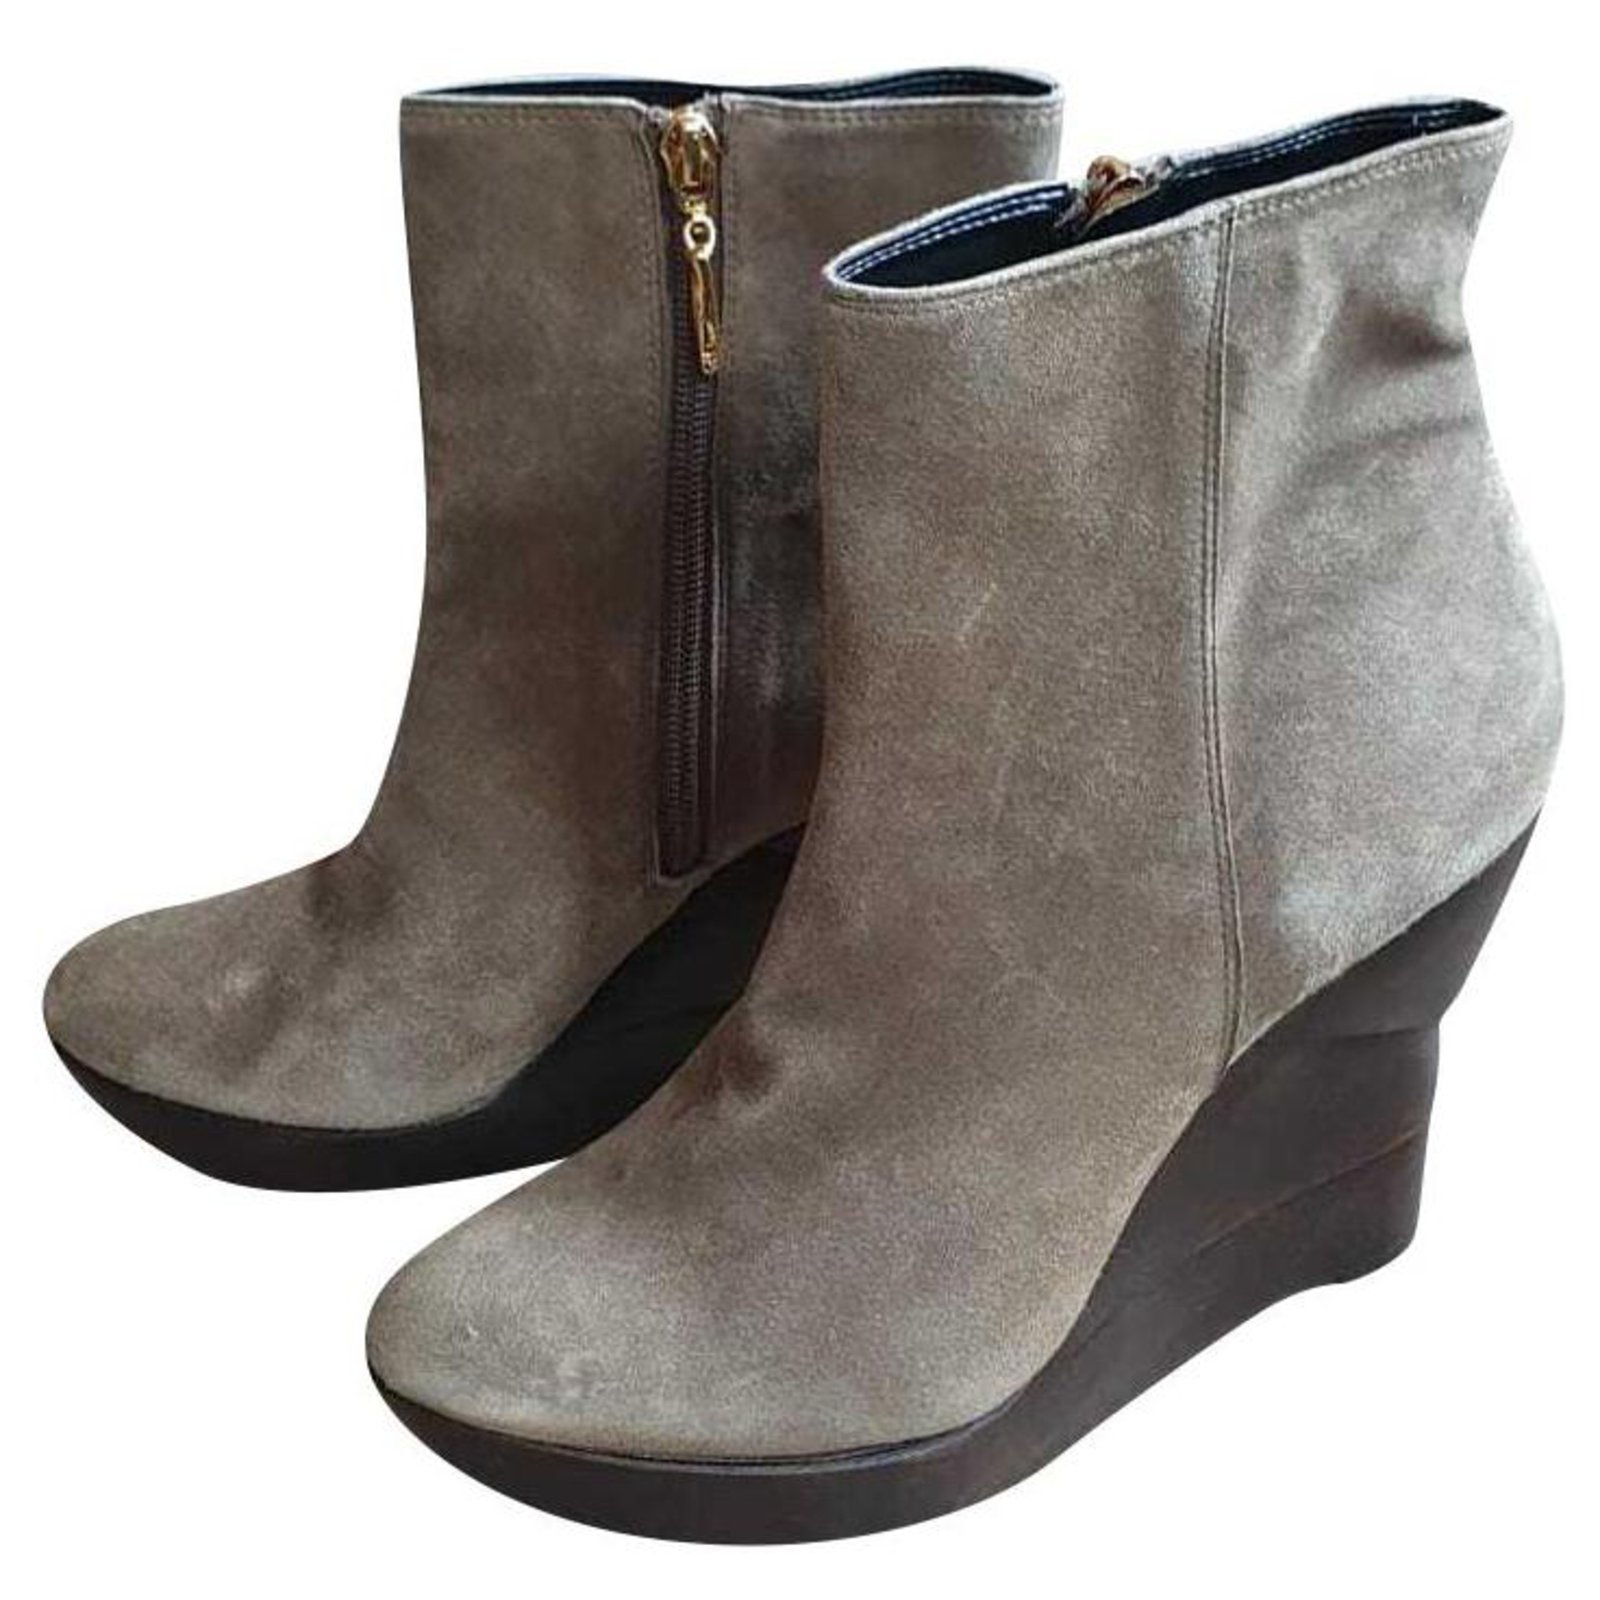 grey suede wedge shoes